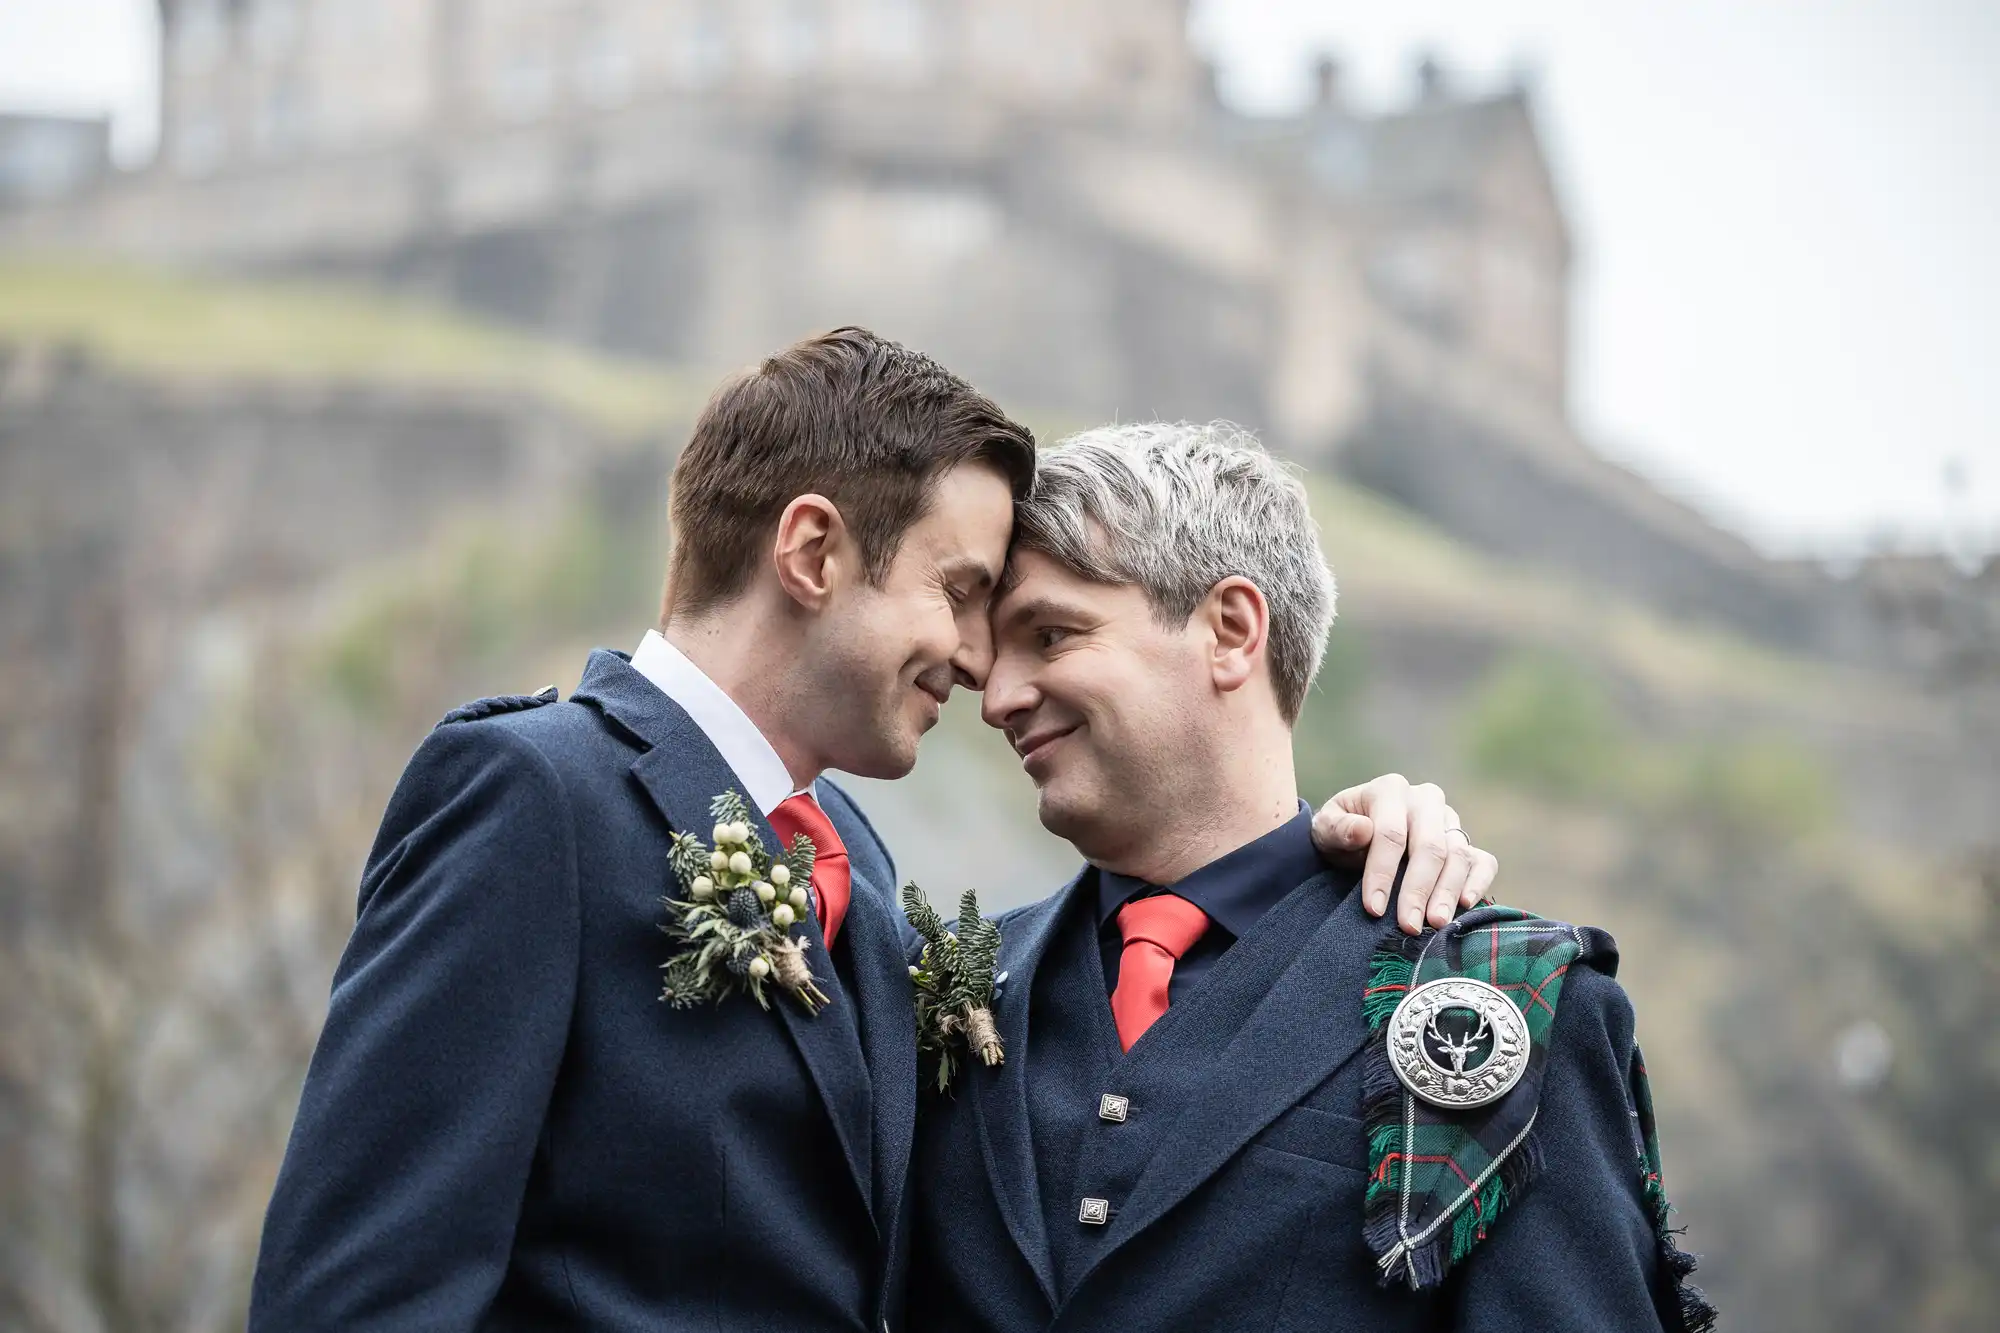 Two men in traditional Scottish attire share an affectionate moment outdoors, with one wrapping his arm around the other. They stand close, smiling at each other. A historic building is in the background.